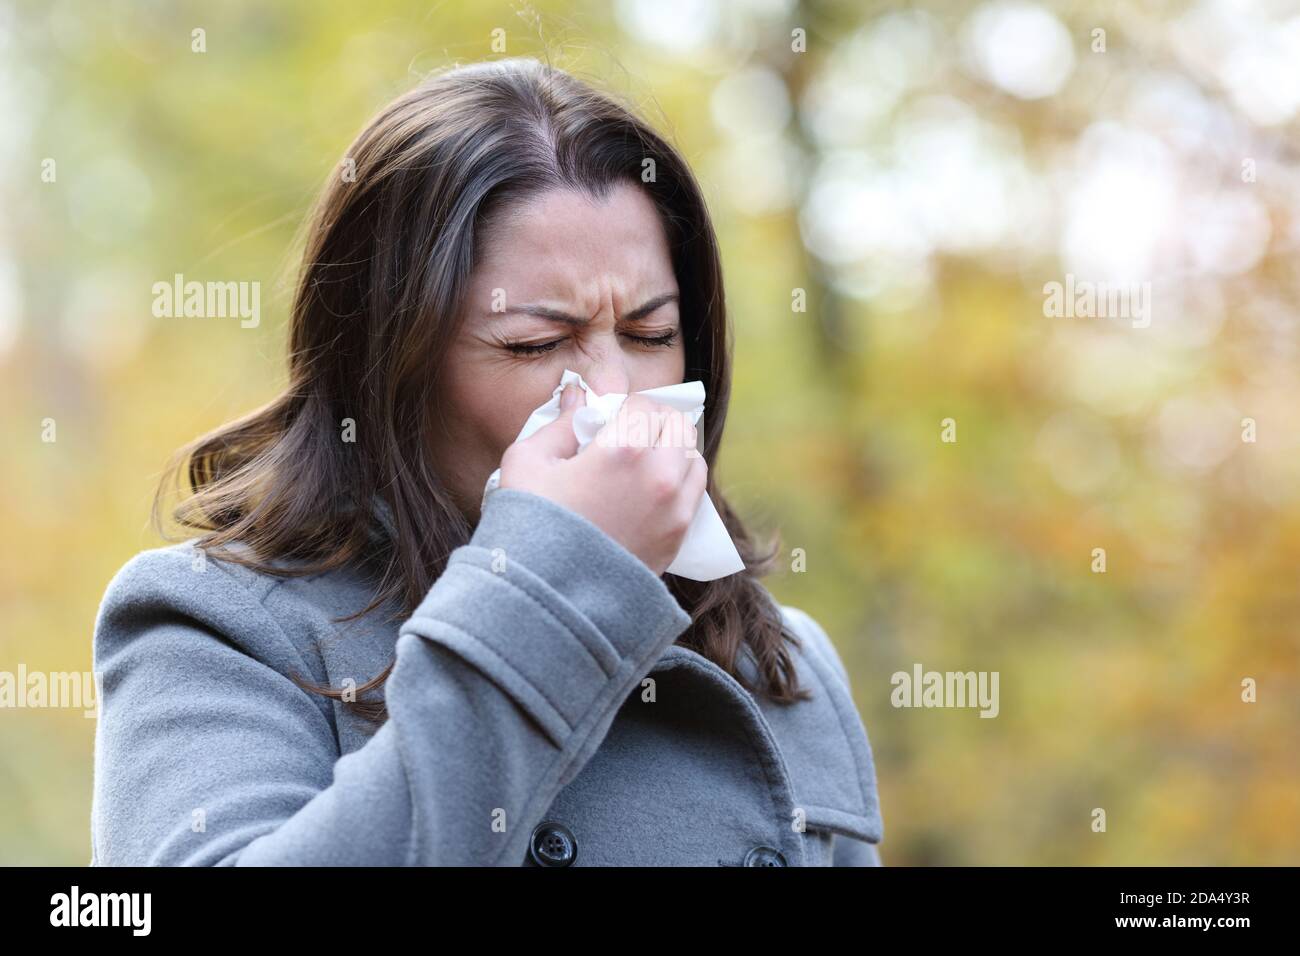 Ill woman with flu symptoms using tissue to blow walking in a park in winter Stock Photo